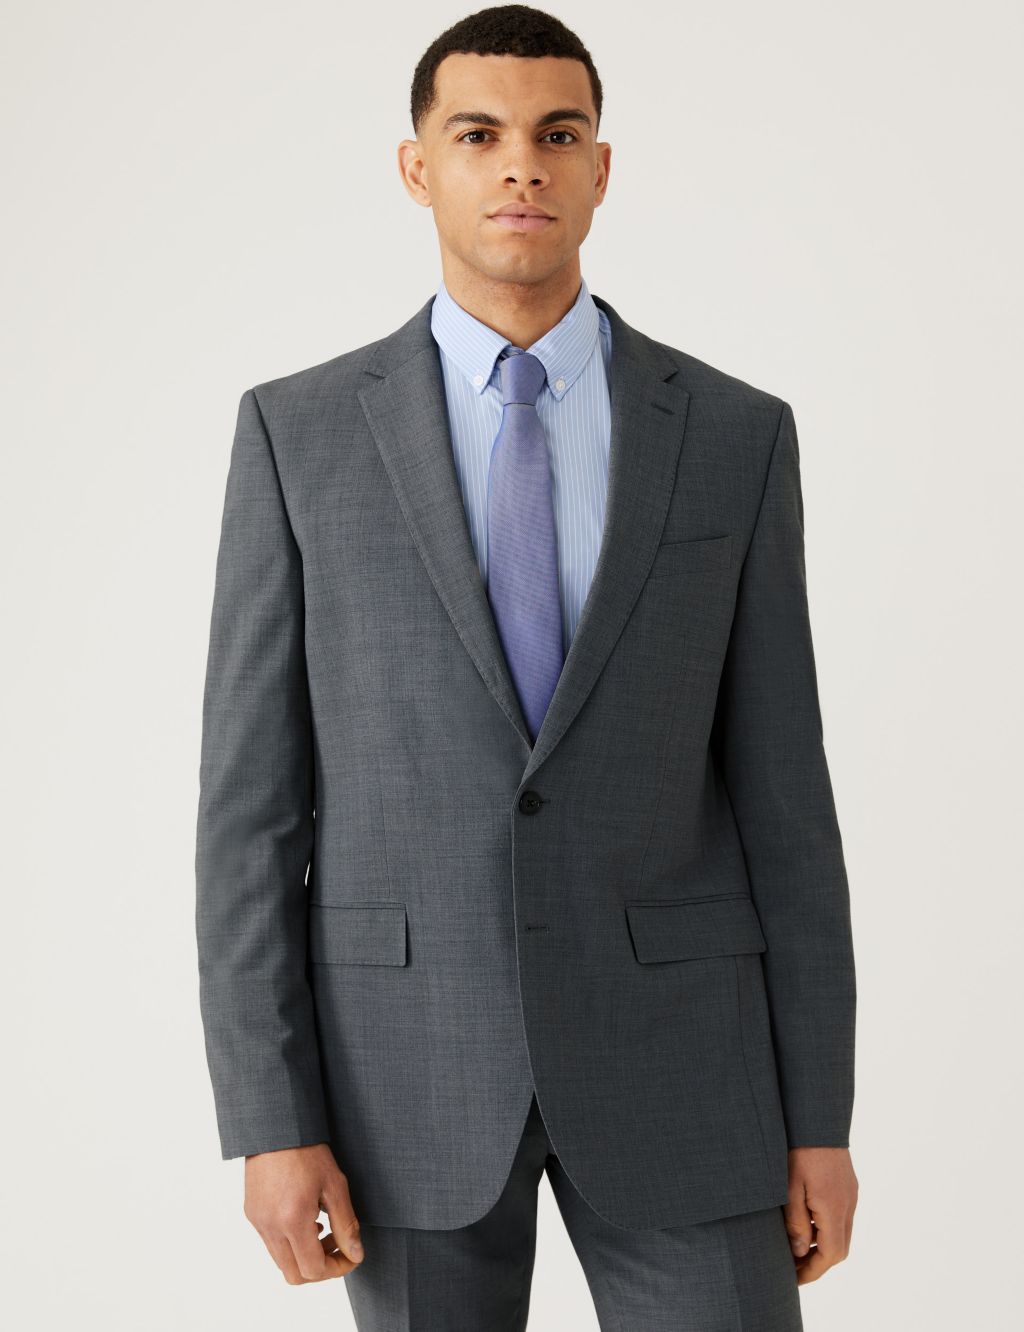 The Ultimate Tailored Fit Suit Jacket image 3